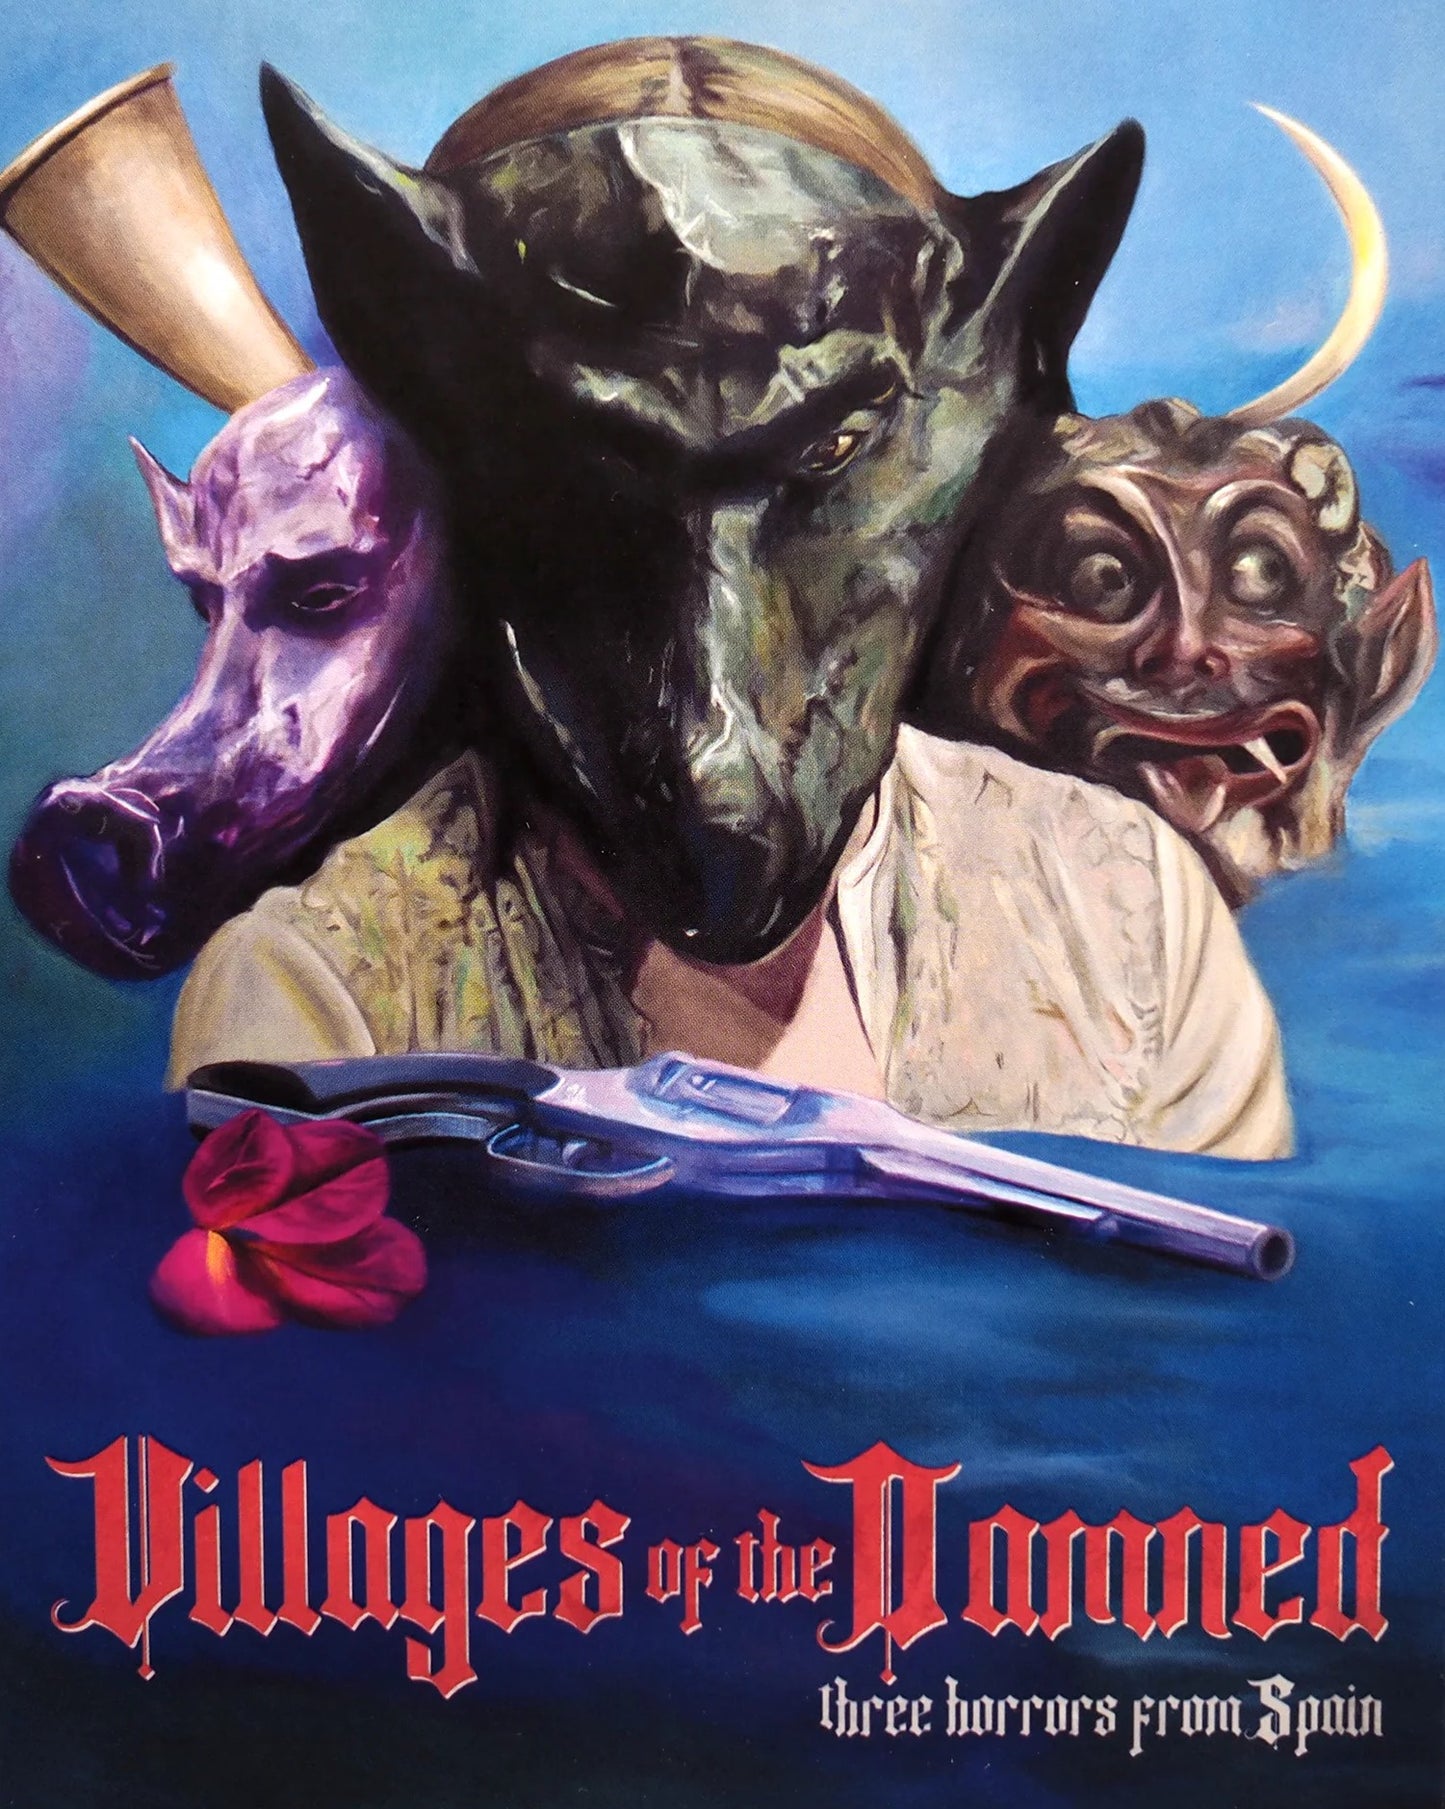 Villages of the Damned: Three Horrors From Spain Limited Edition Vinegar Syndrome Blu-Ray Box Set [NEW] [SLIPCOVER]